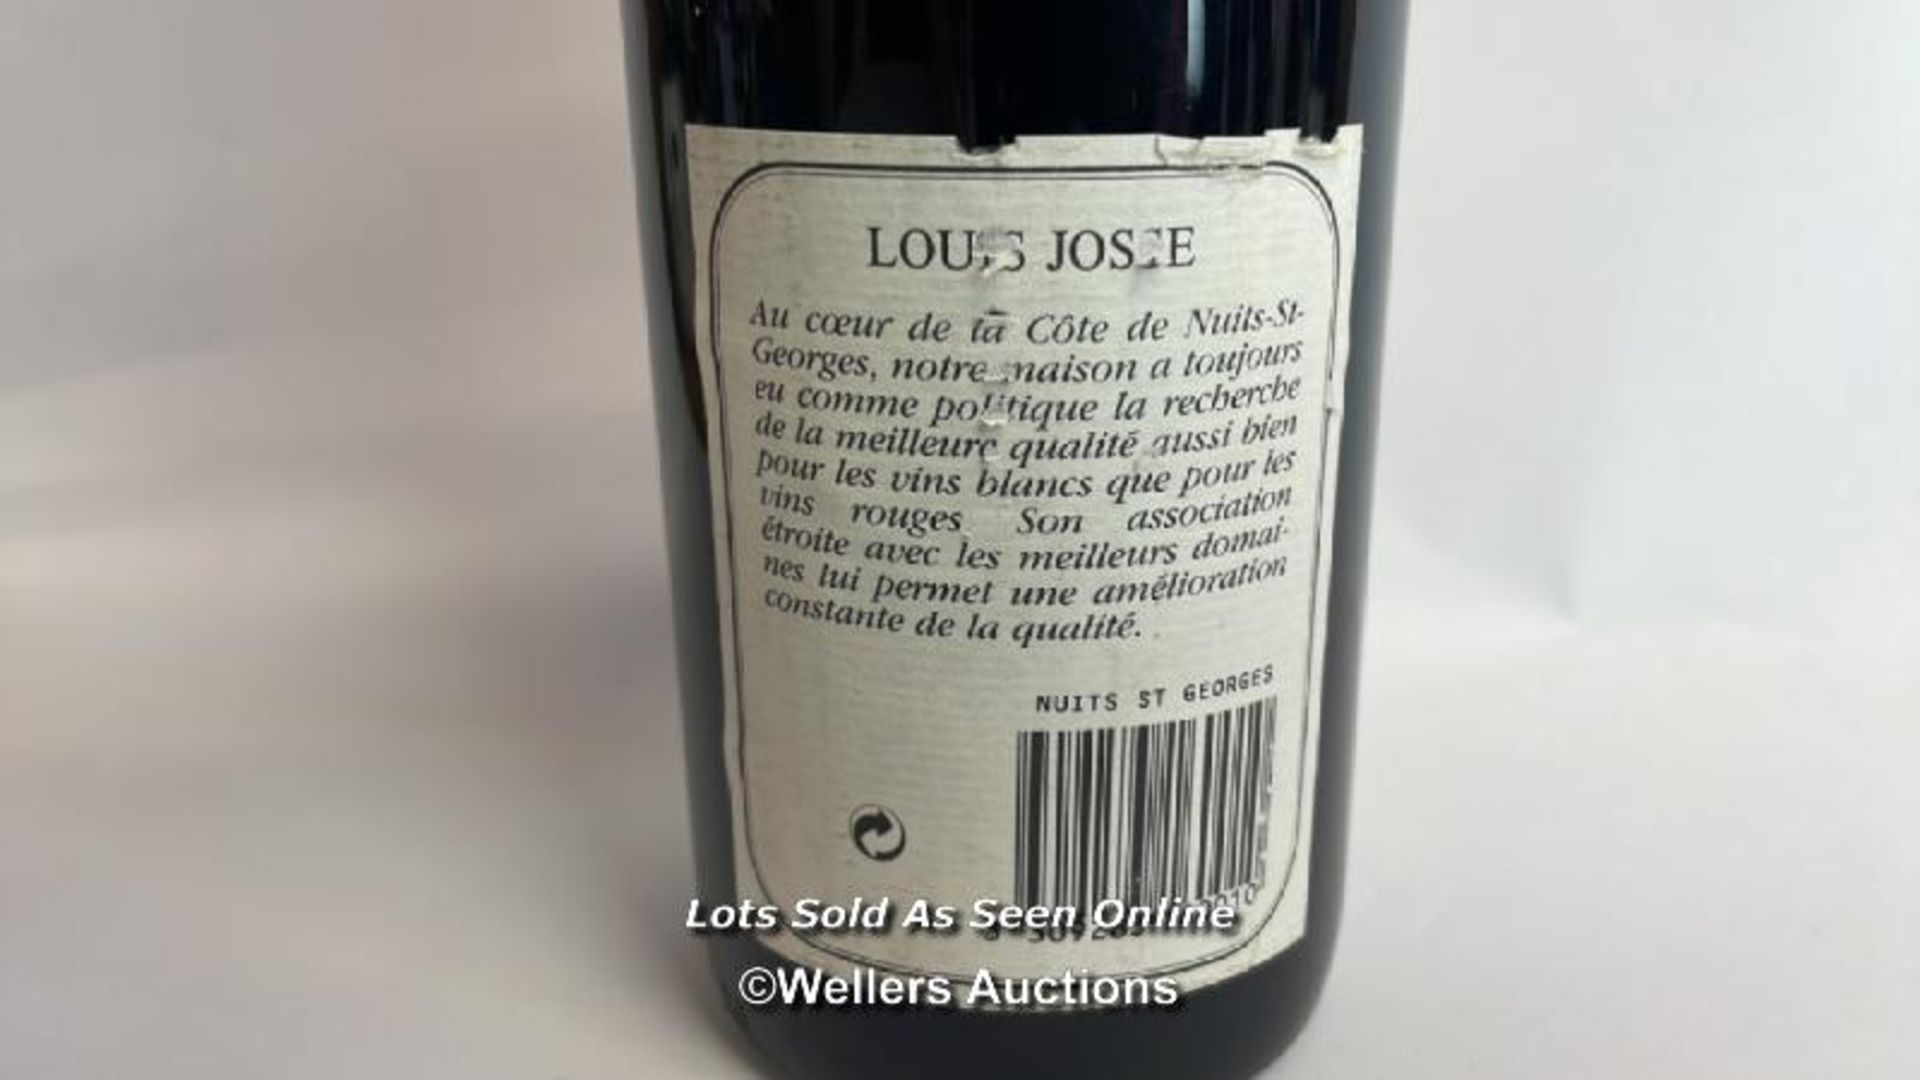 1995 Louis Josse Nuits-St-Georges, 75CL, 13% vol / Please see images for fill level and general - Image 4 of 4